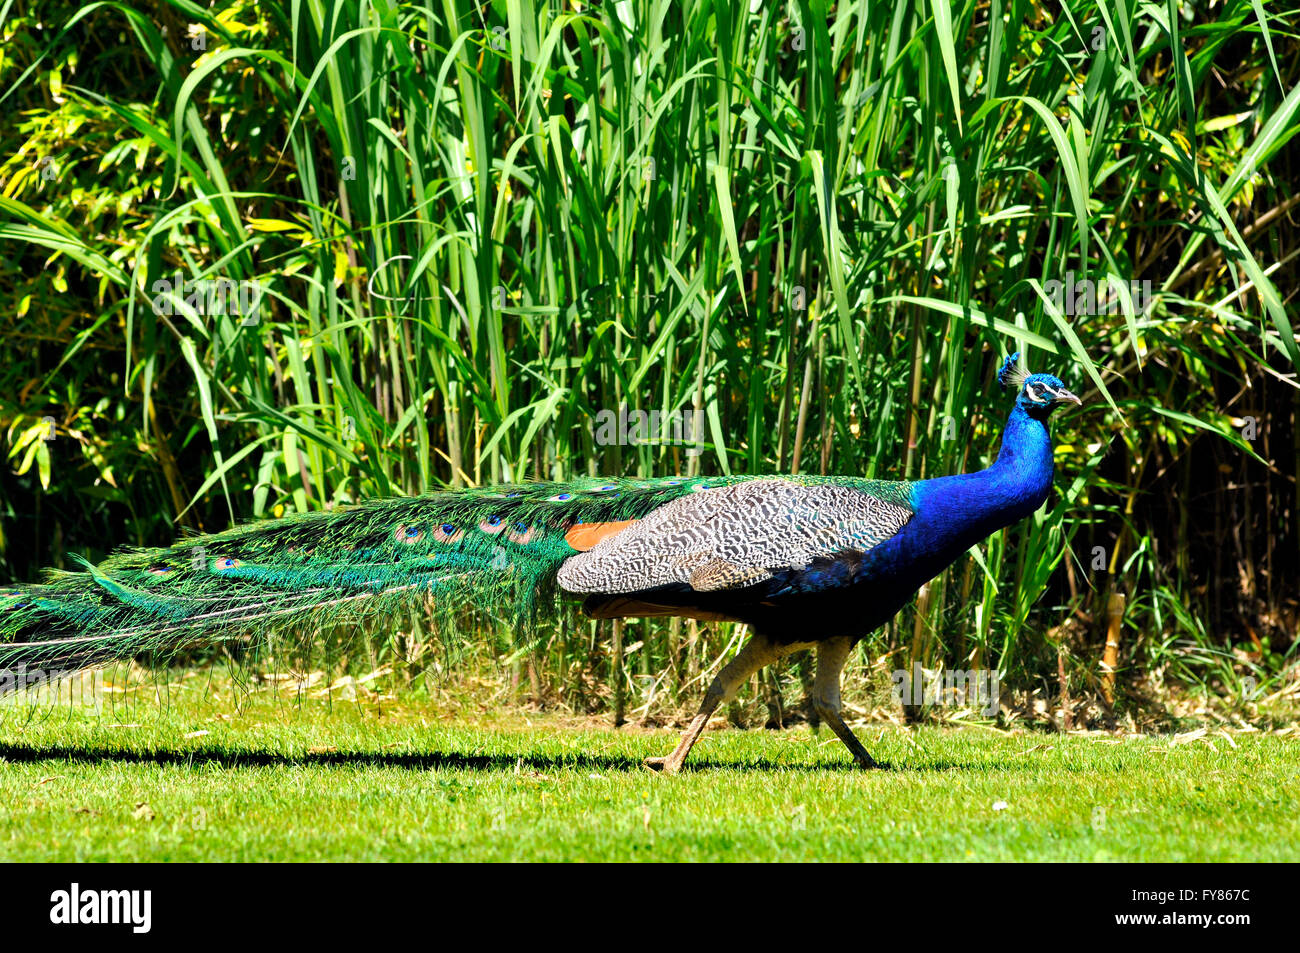 Male Indian Peafowl (Pavo cristatus) walking on grass and seen from profile Stock Photo